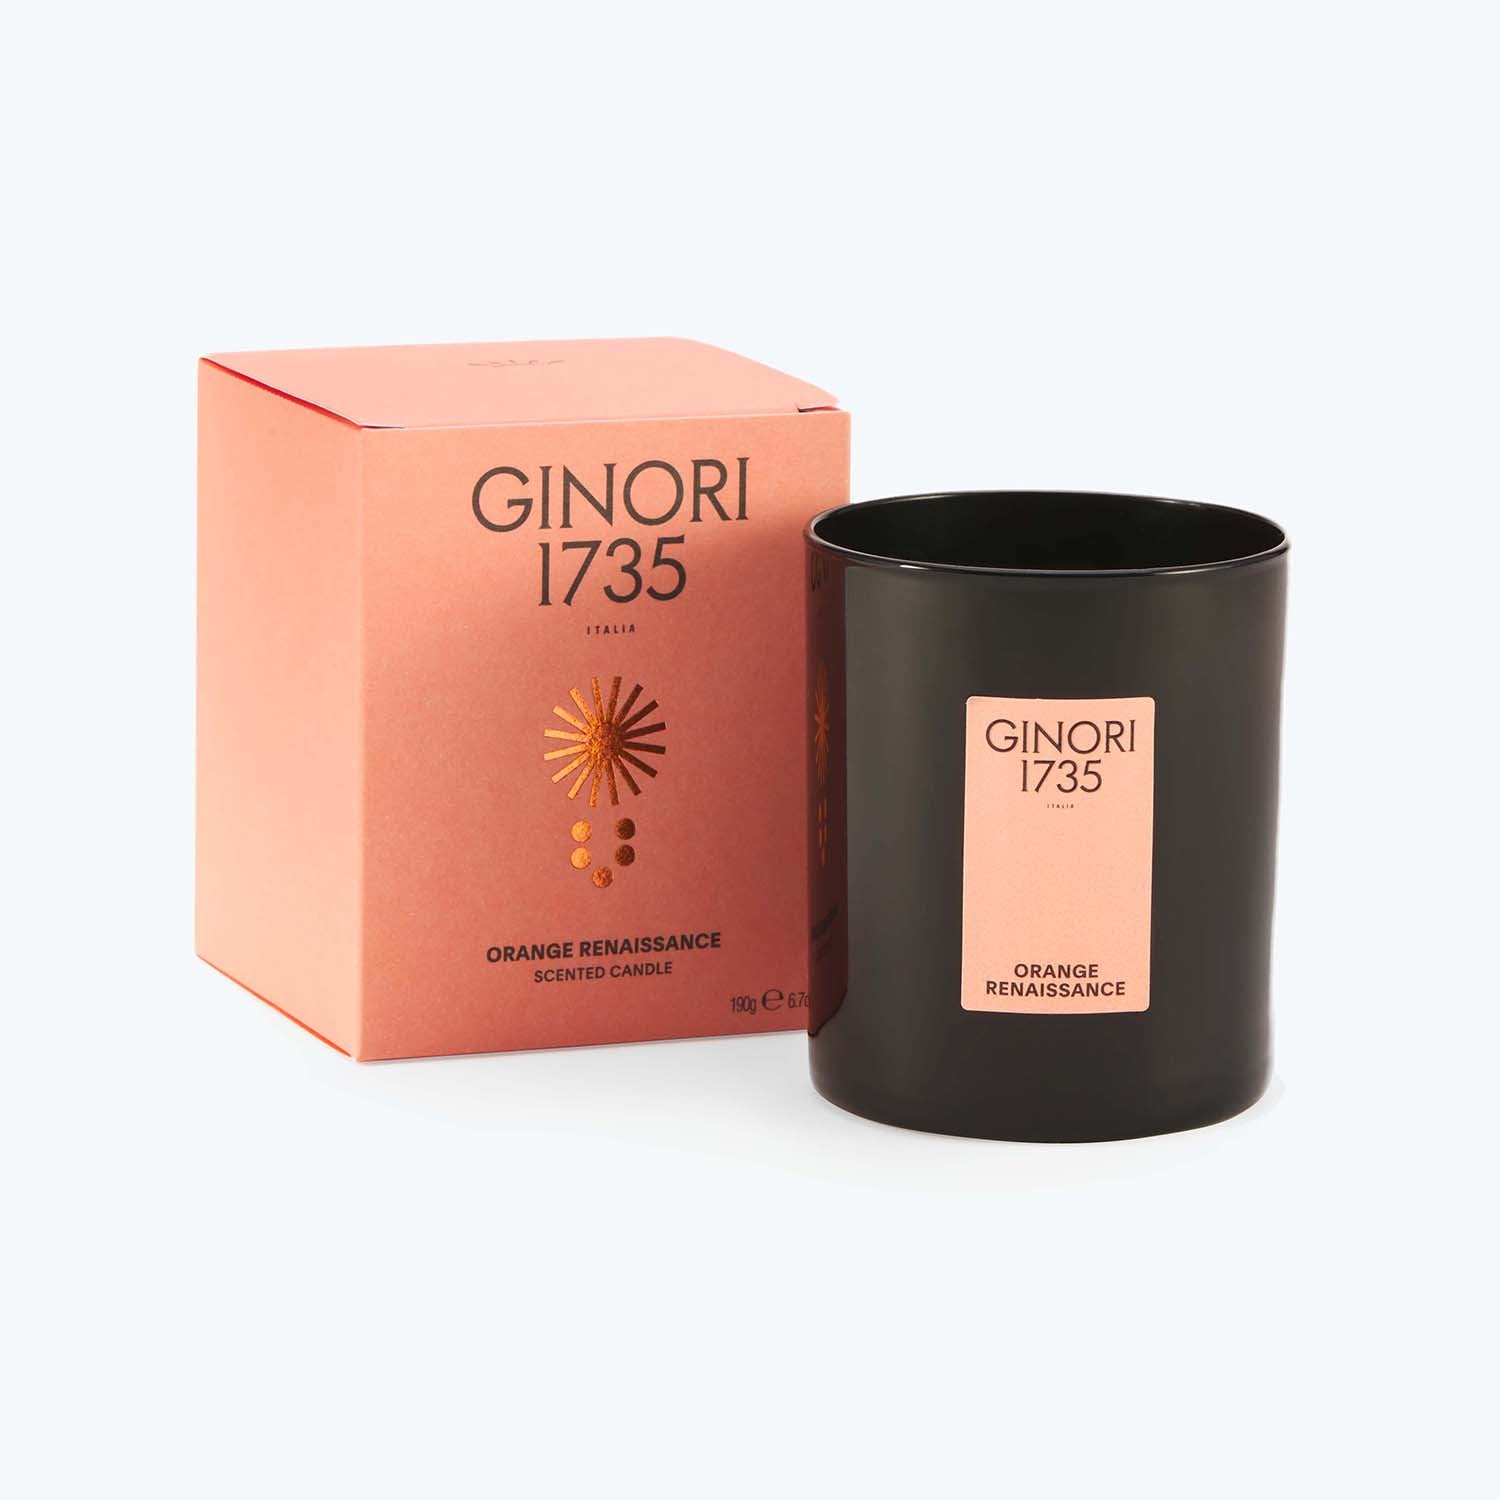 Elegant scented candle and packaging box exuding luxury and minimalism.